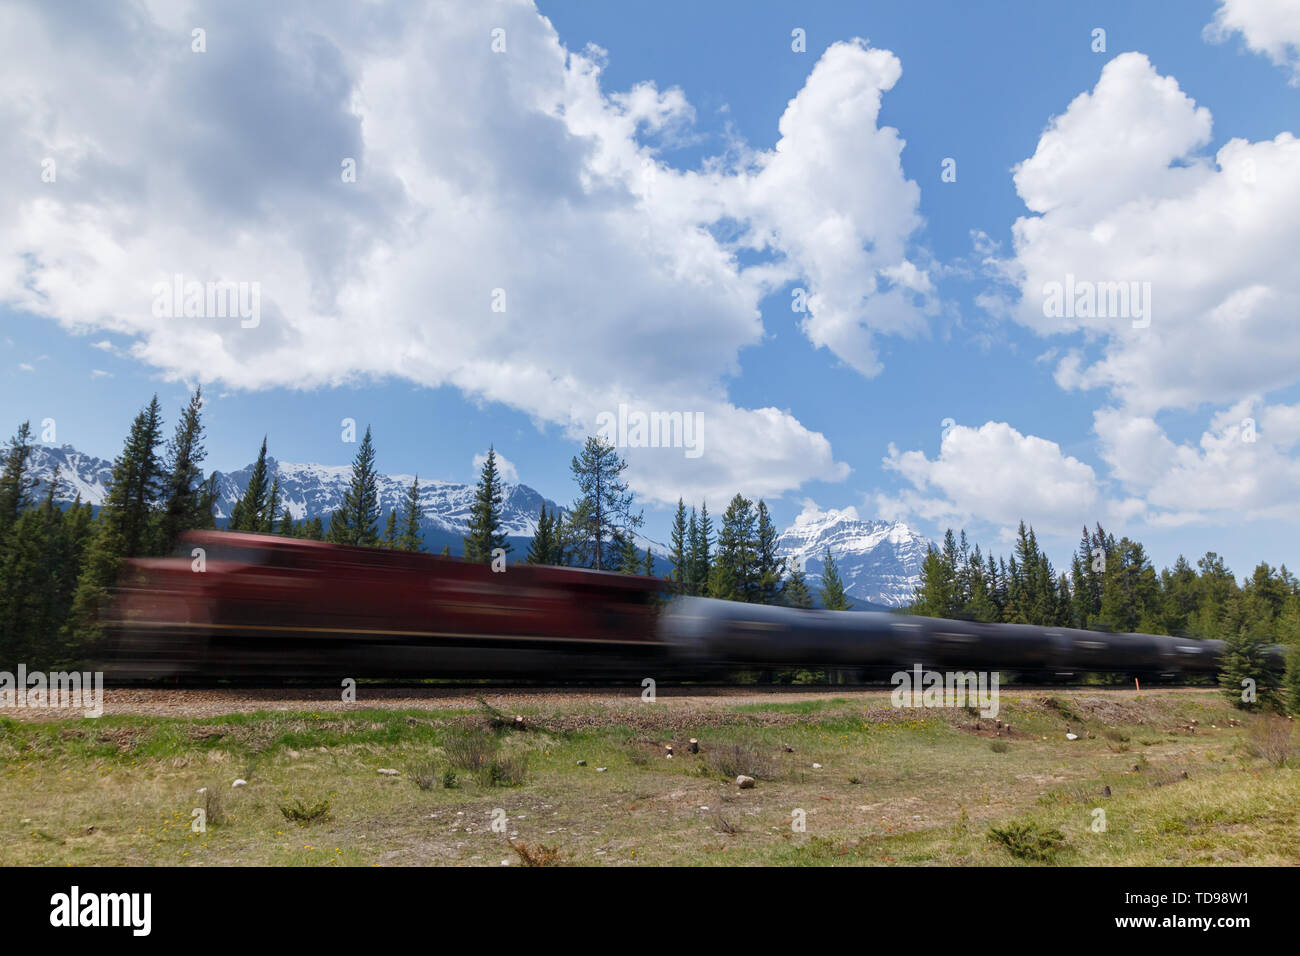 Fast moving train with mountainous landscape background Stock Photo